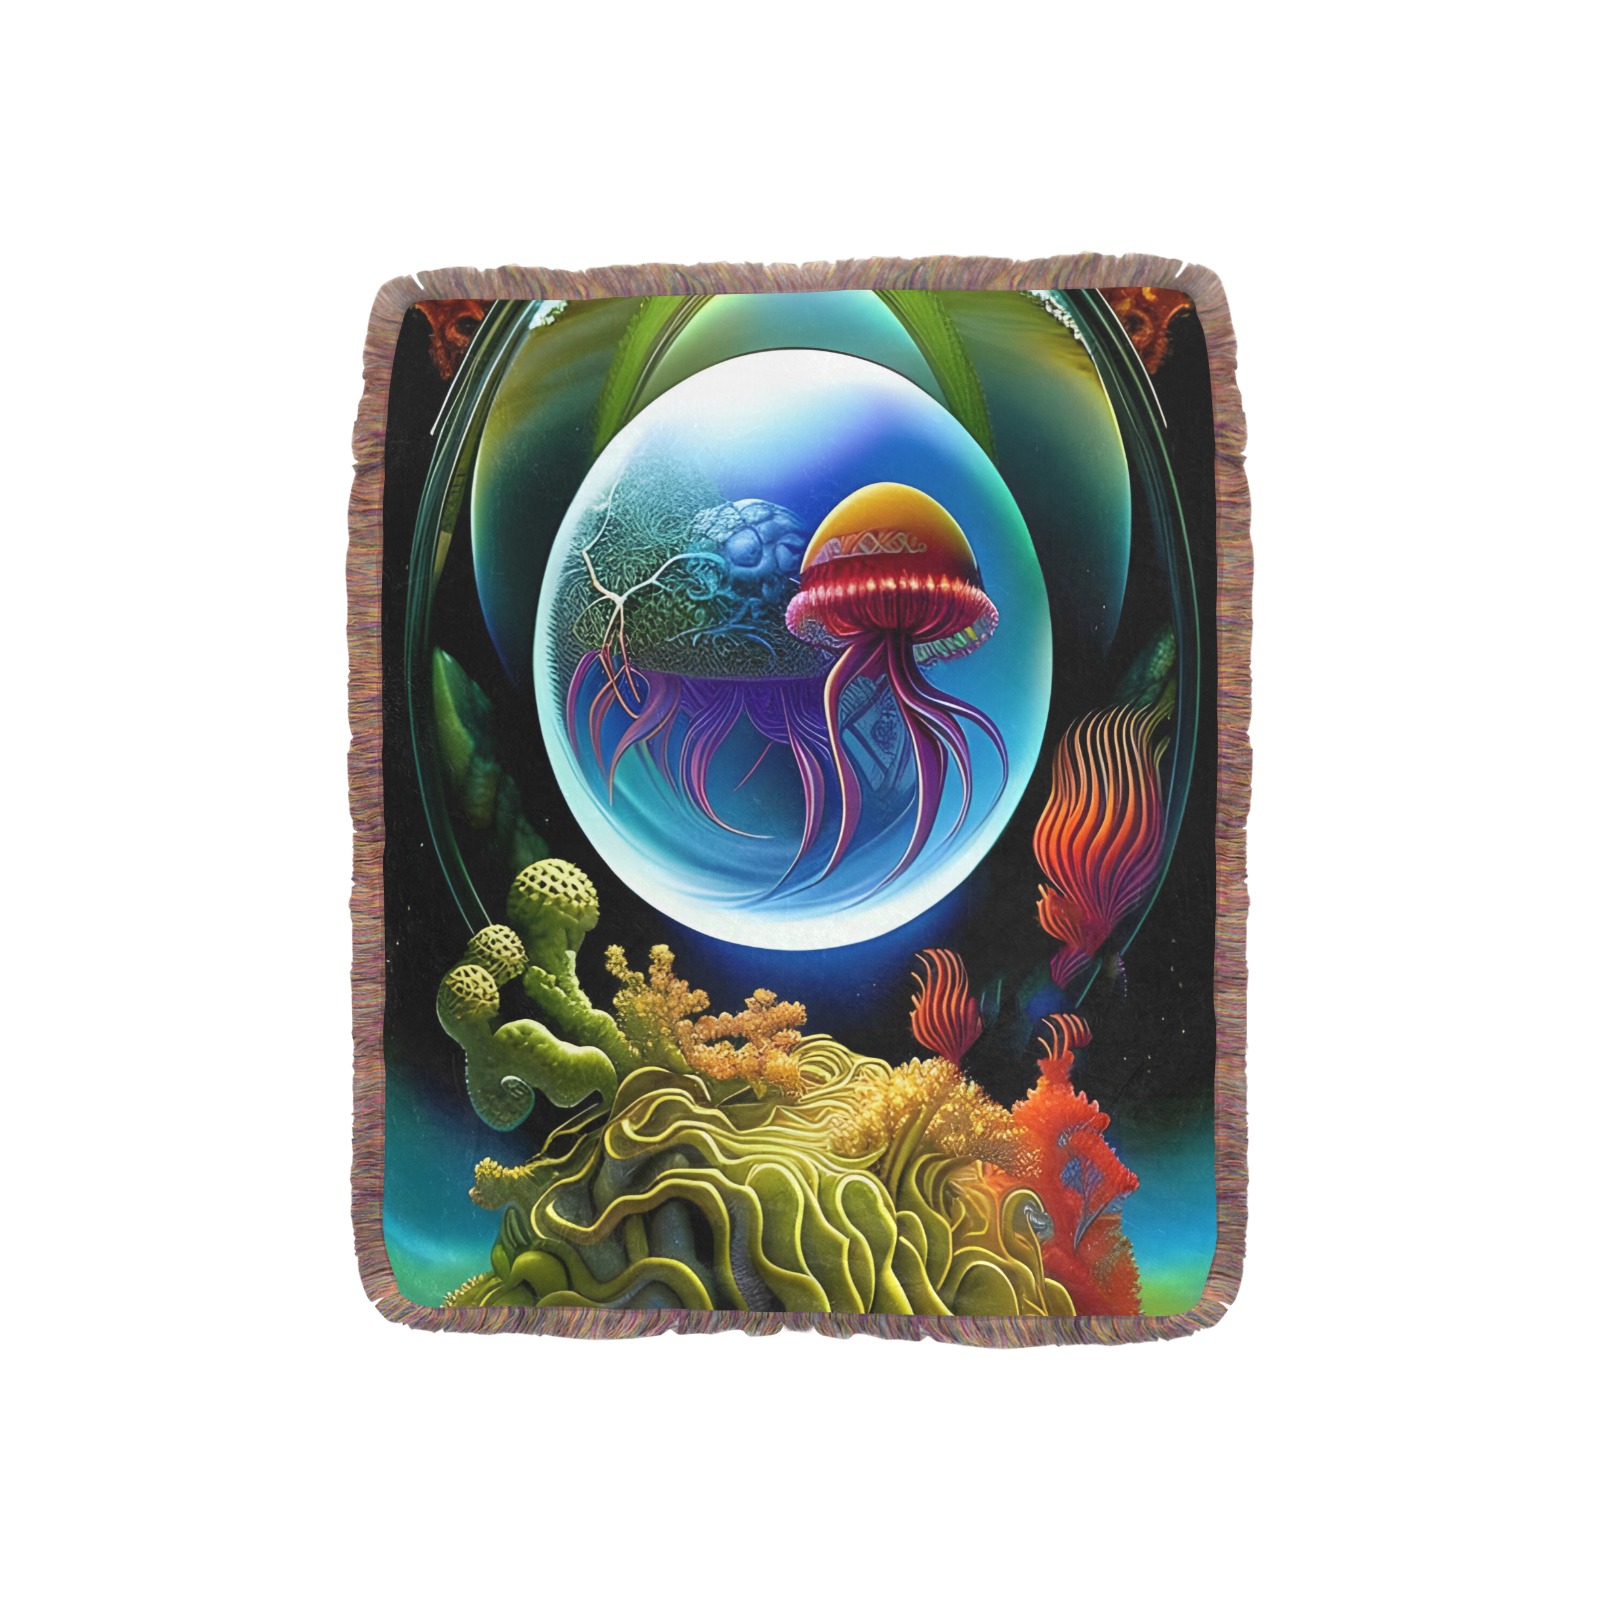 Out Of This World Spheres jellyfish Ultra-Soft Fringe Blanket 40"x50" (Mixed Green)